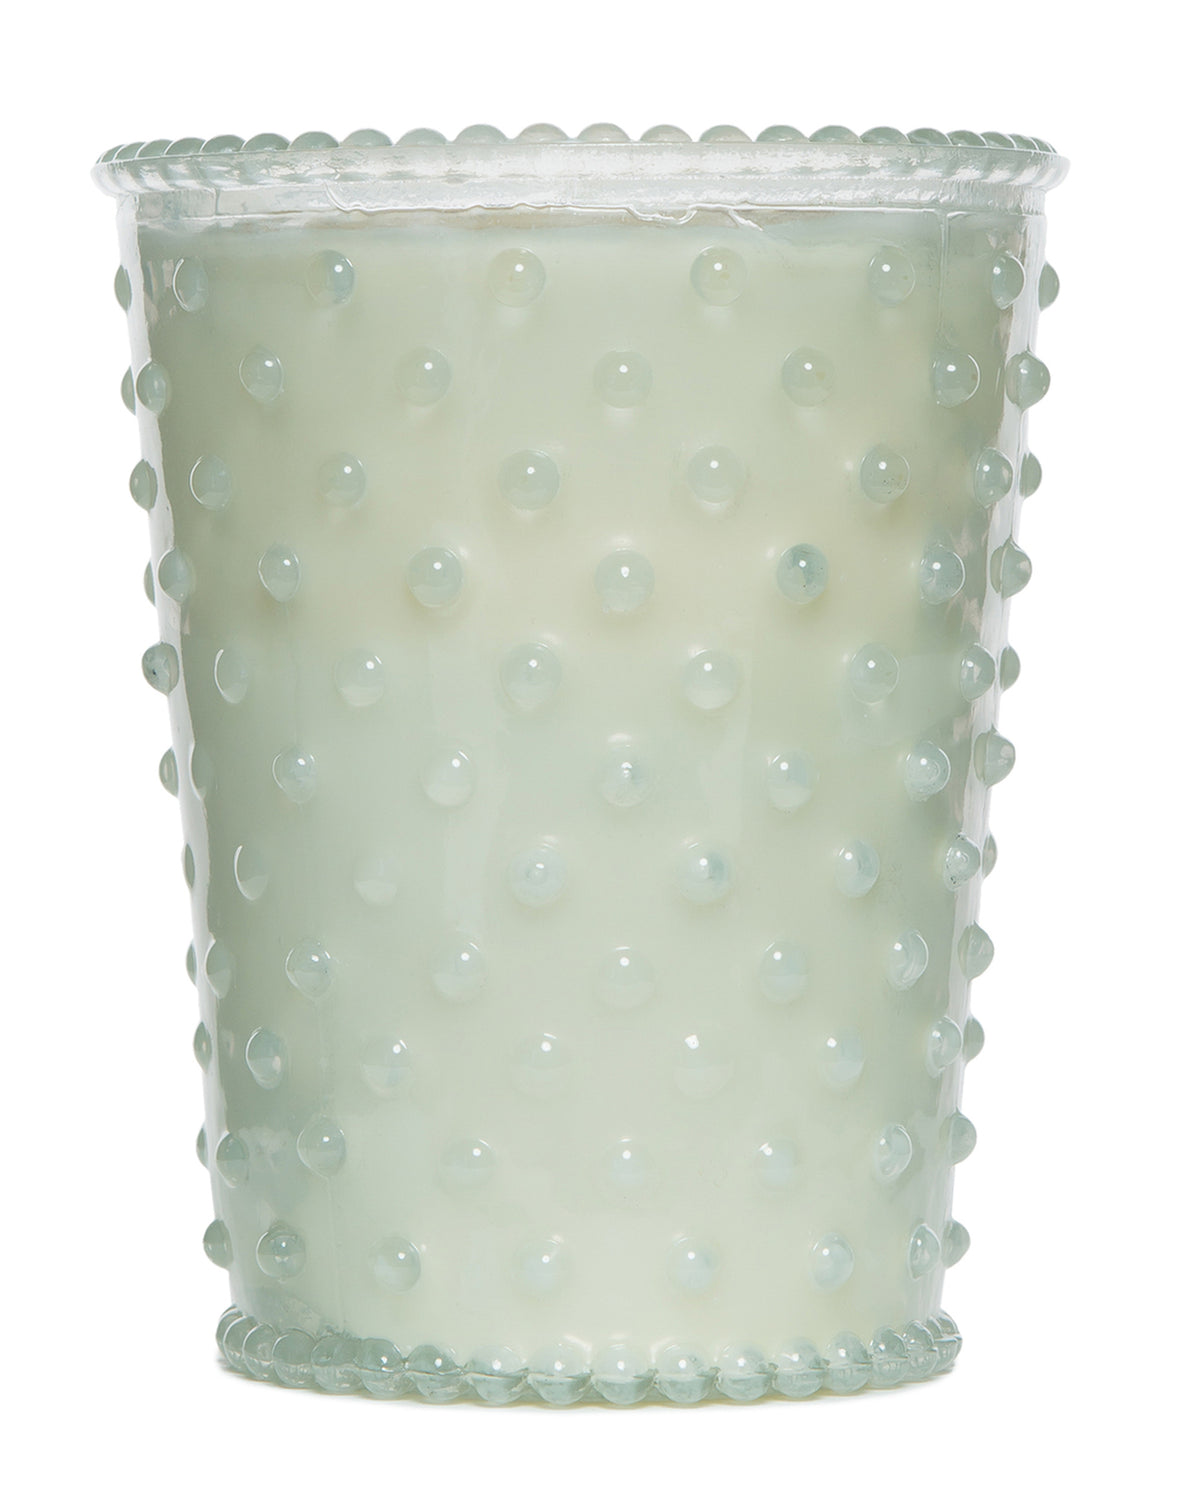 A translucent, milky-white glass with a raised dot design covering its surface, designed for a Simpatico NO. 85 SNOW Hobnail Glass Candle, isolated on a white background.